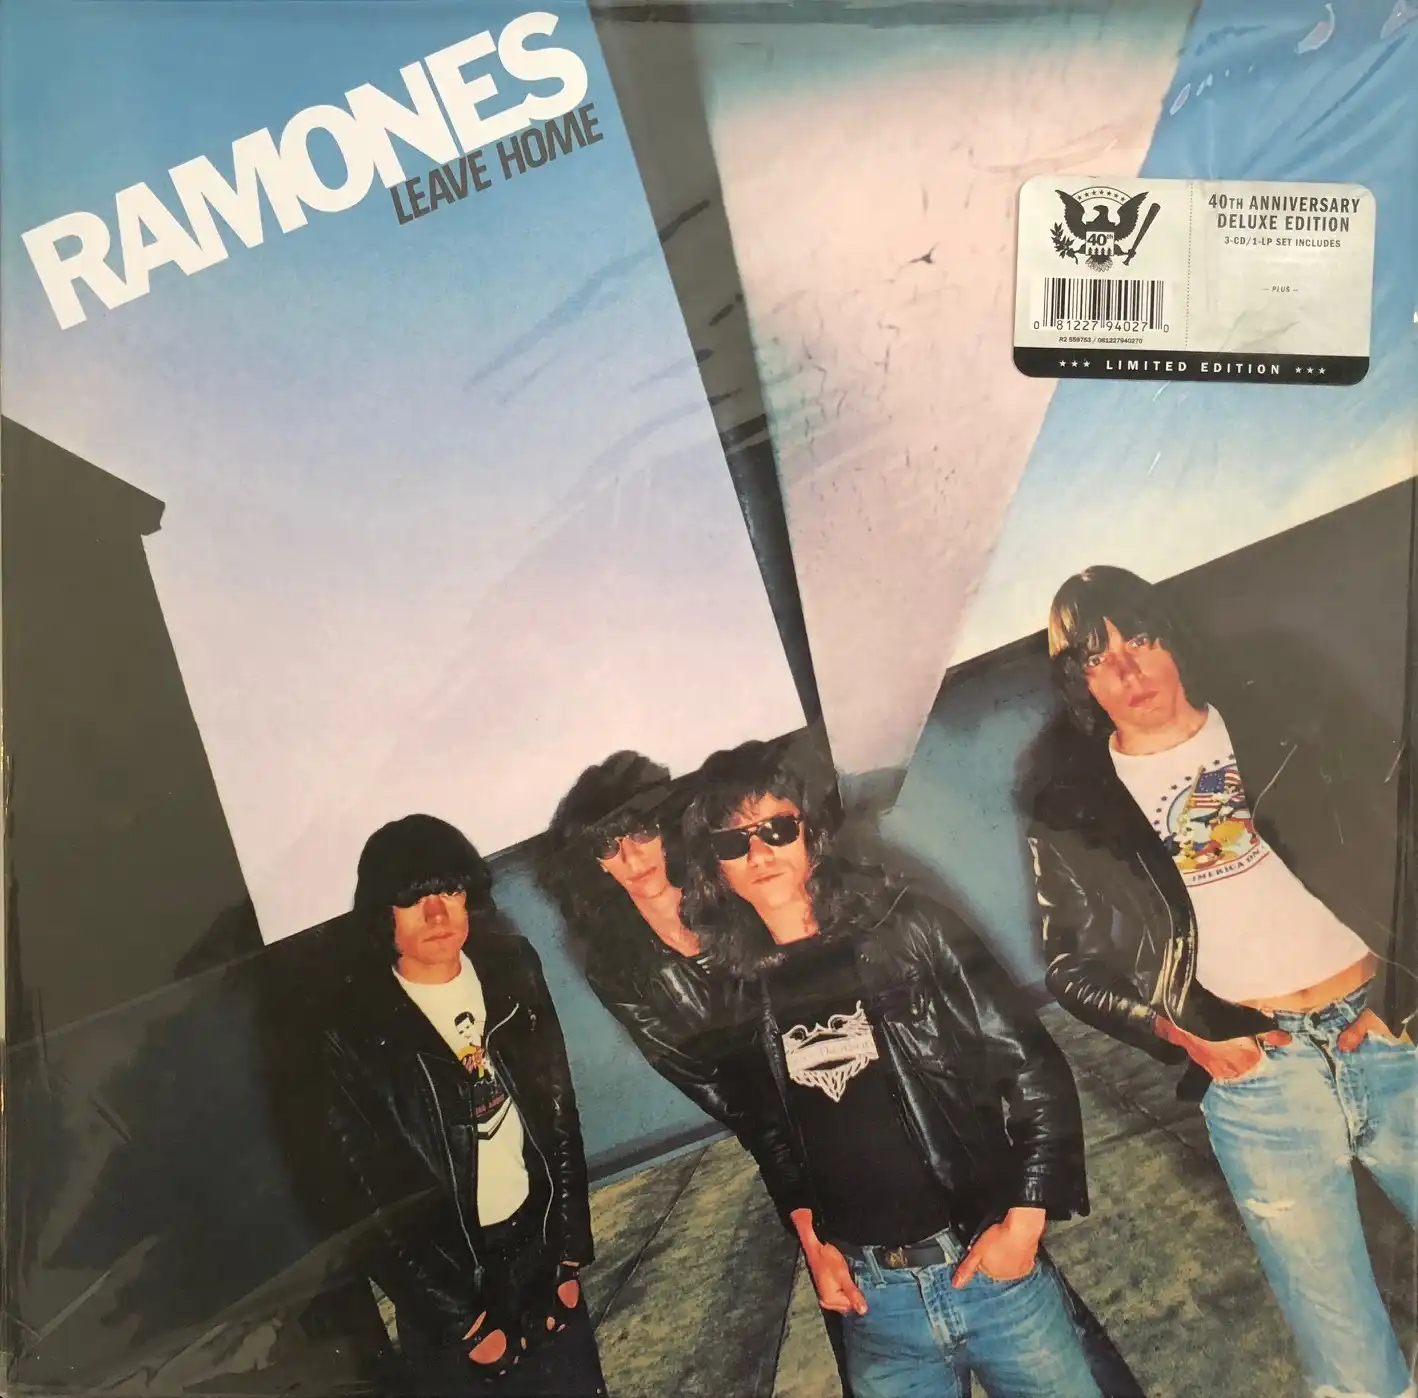 RAMONES / LEAVE HOME (40TH ANNIVERSARY DELUXE EDITION)